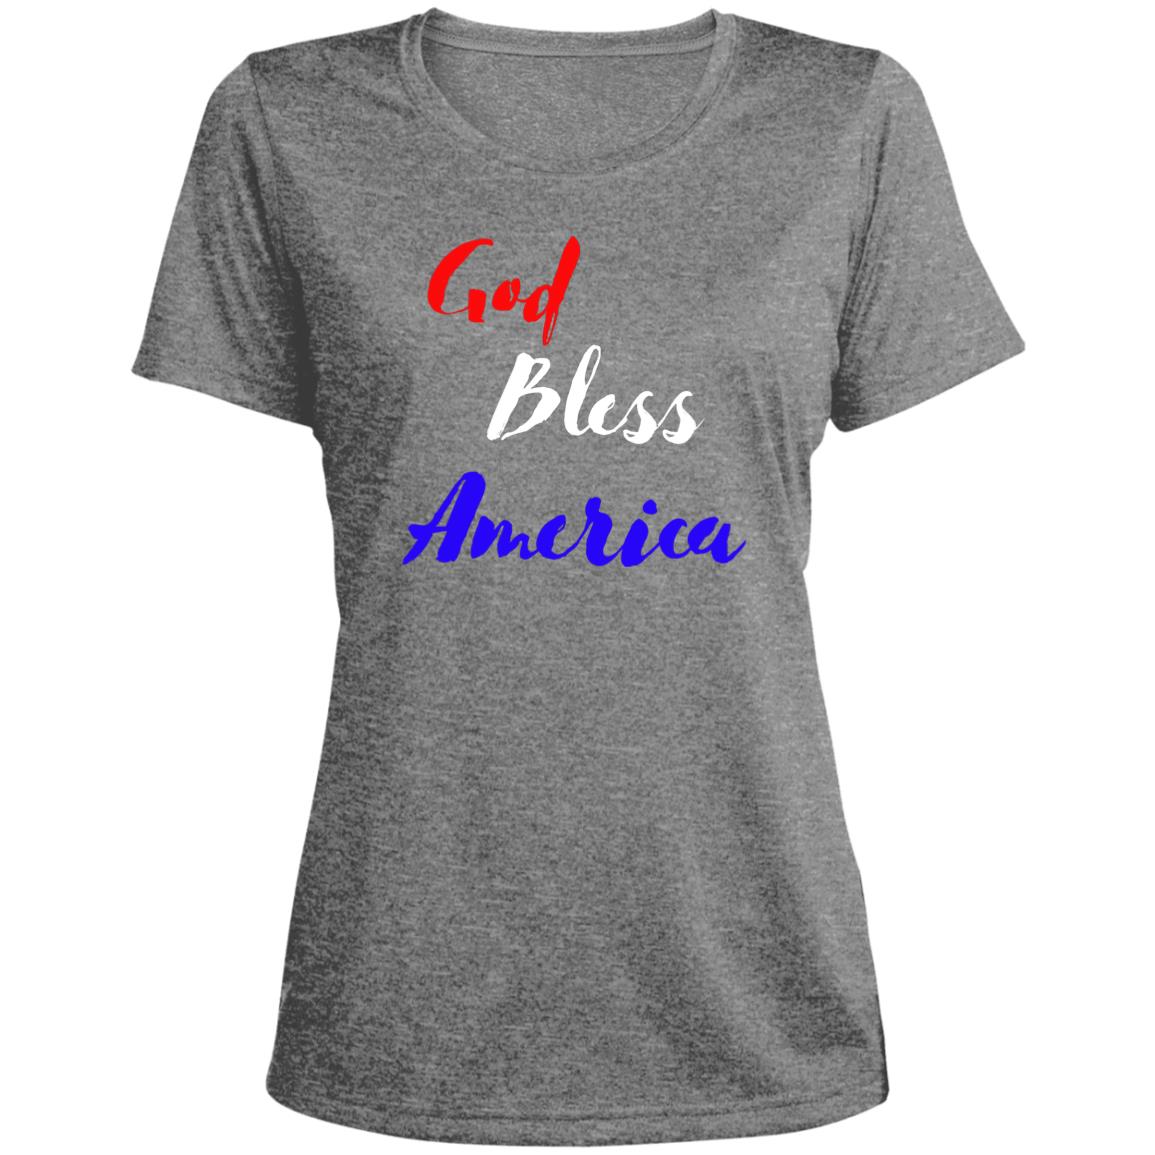 God bless America red white blue LST360 Ladies' Heather Scoop Neck Performance Tee